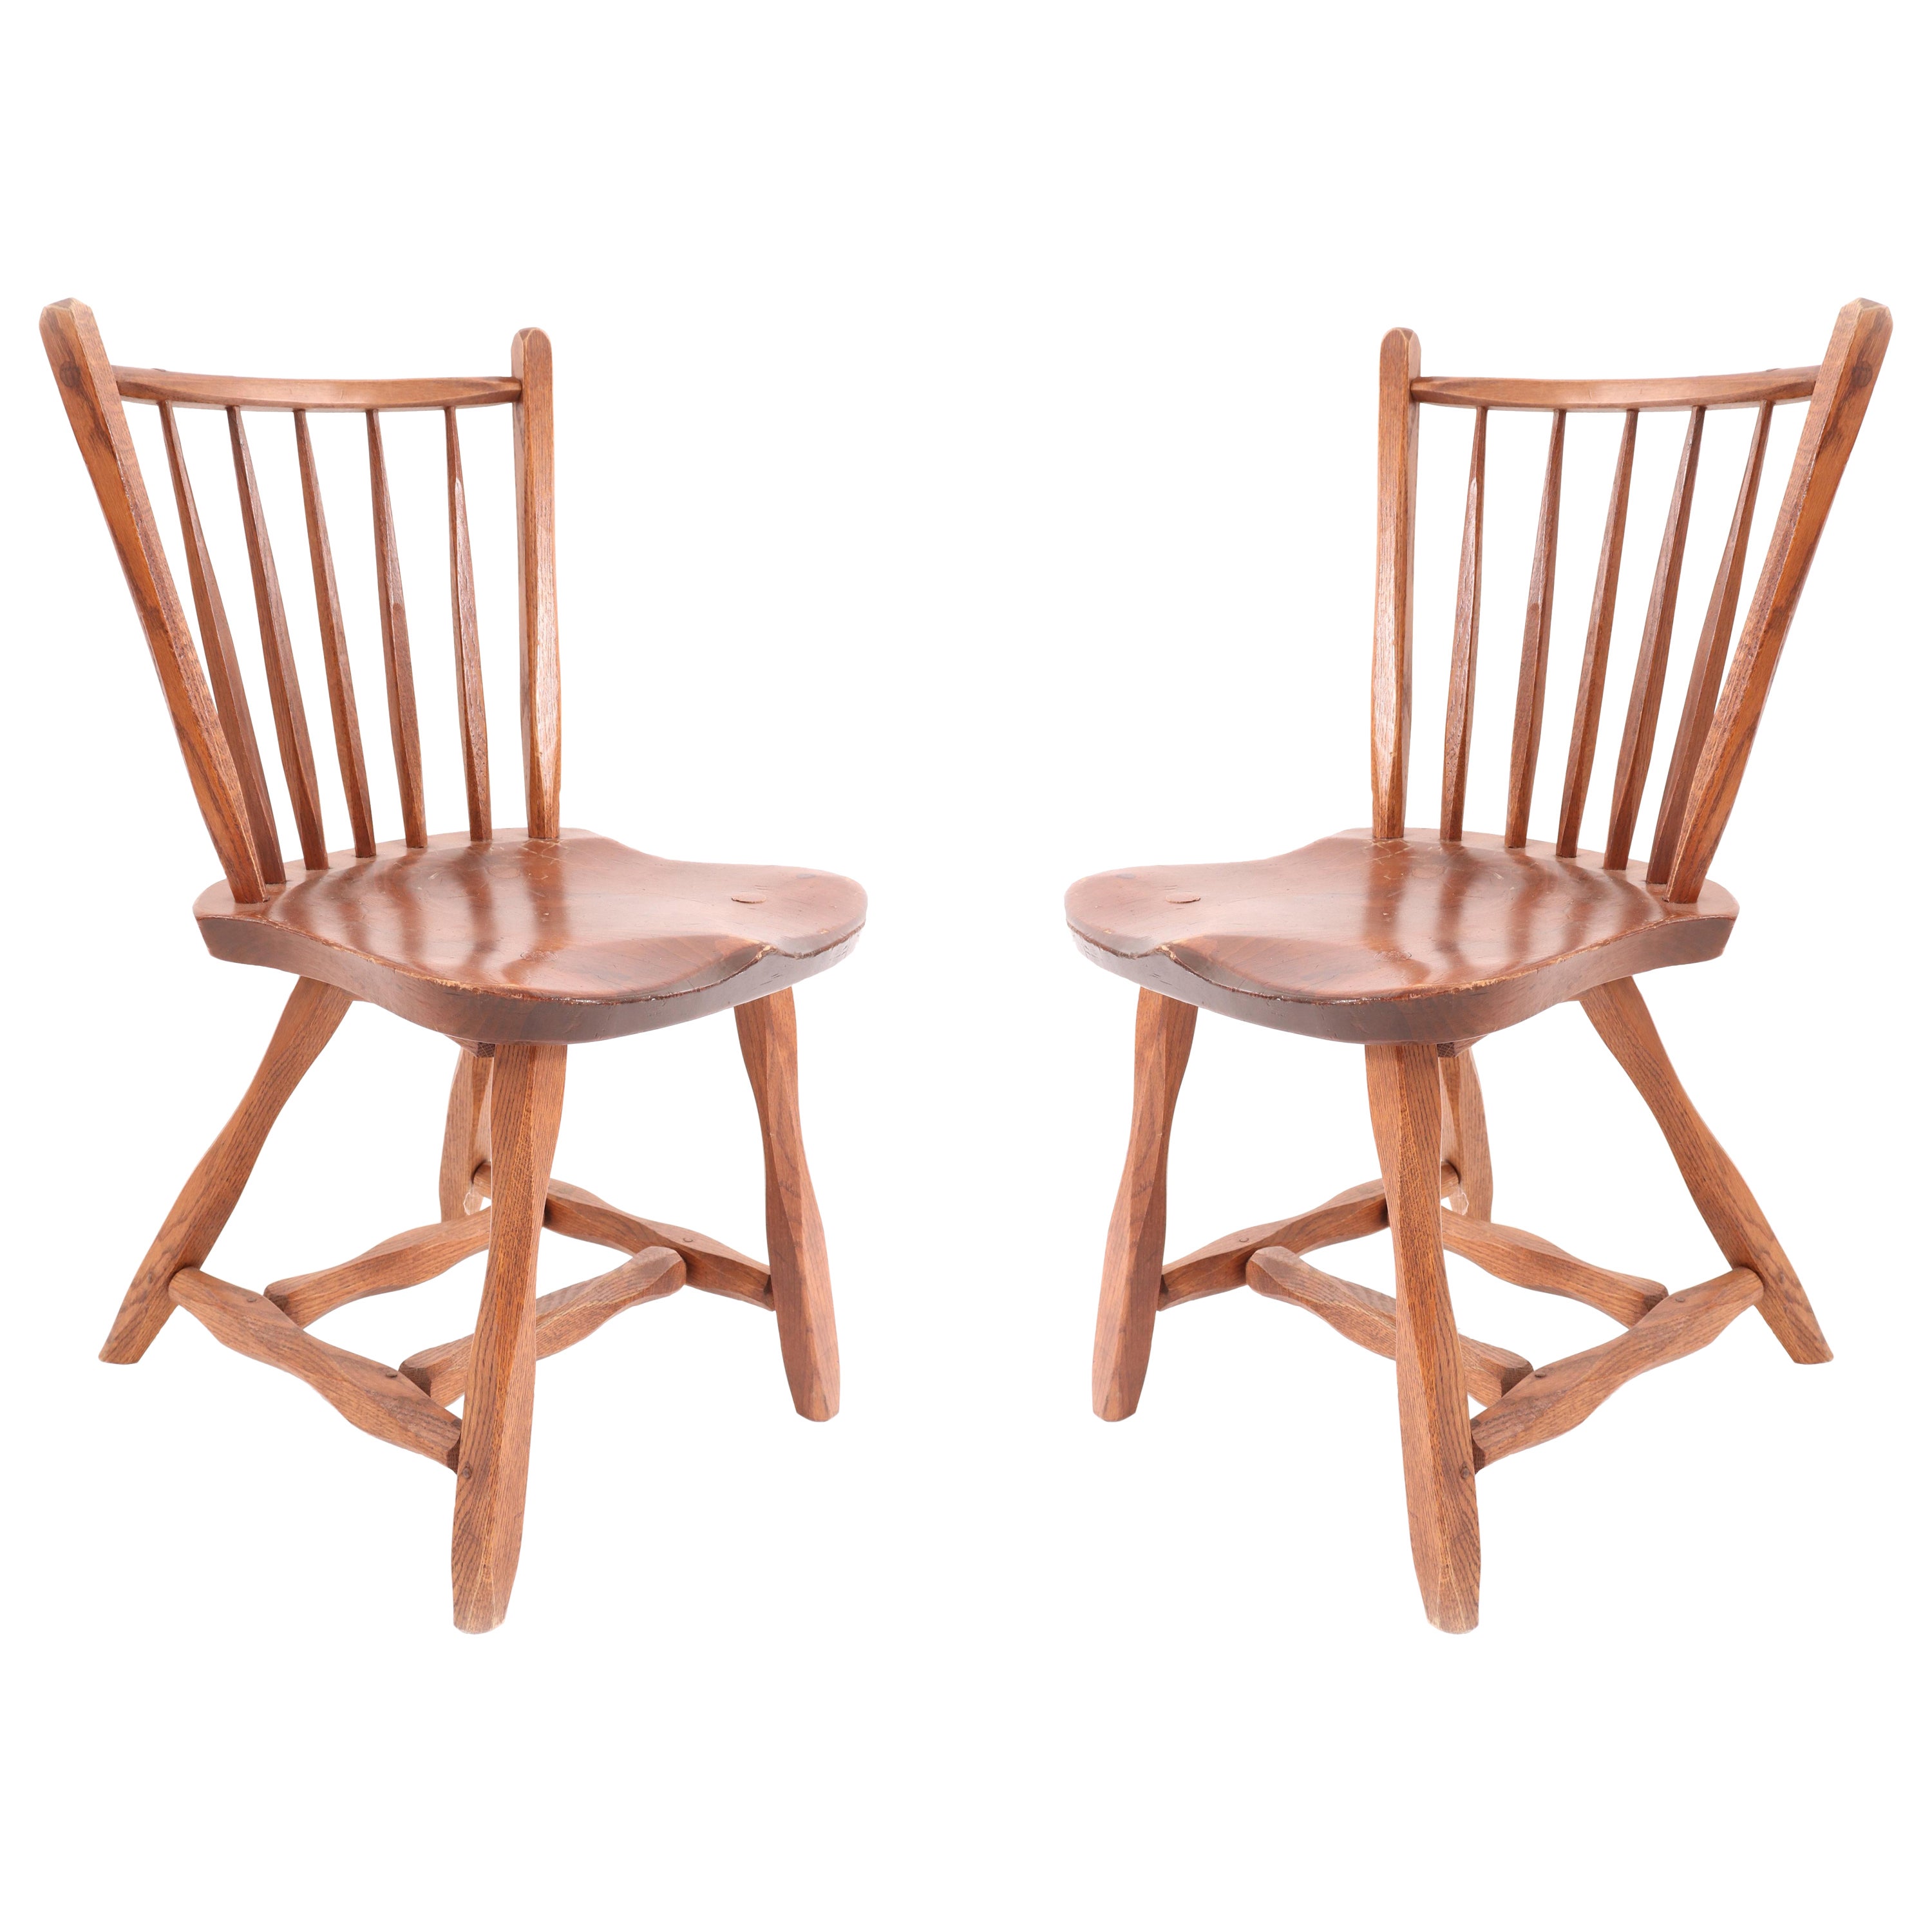 7 Wooden Windsor Style Dining Chairs